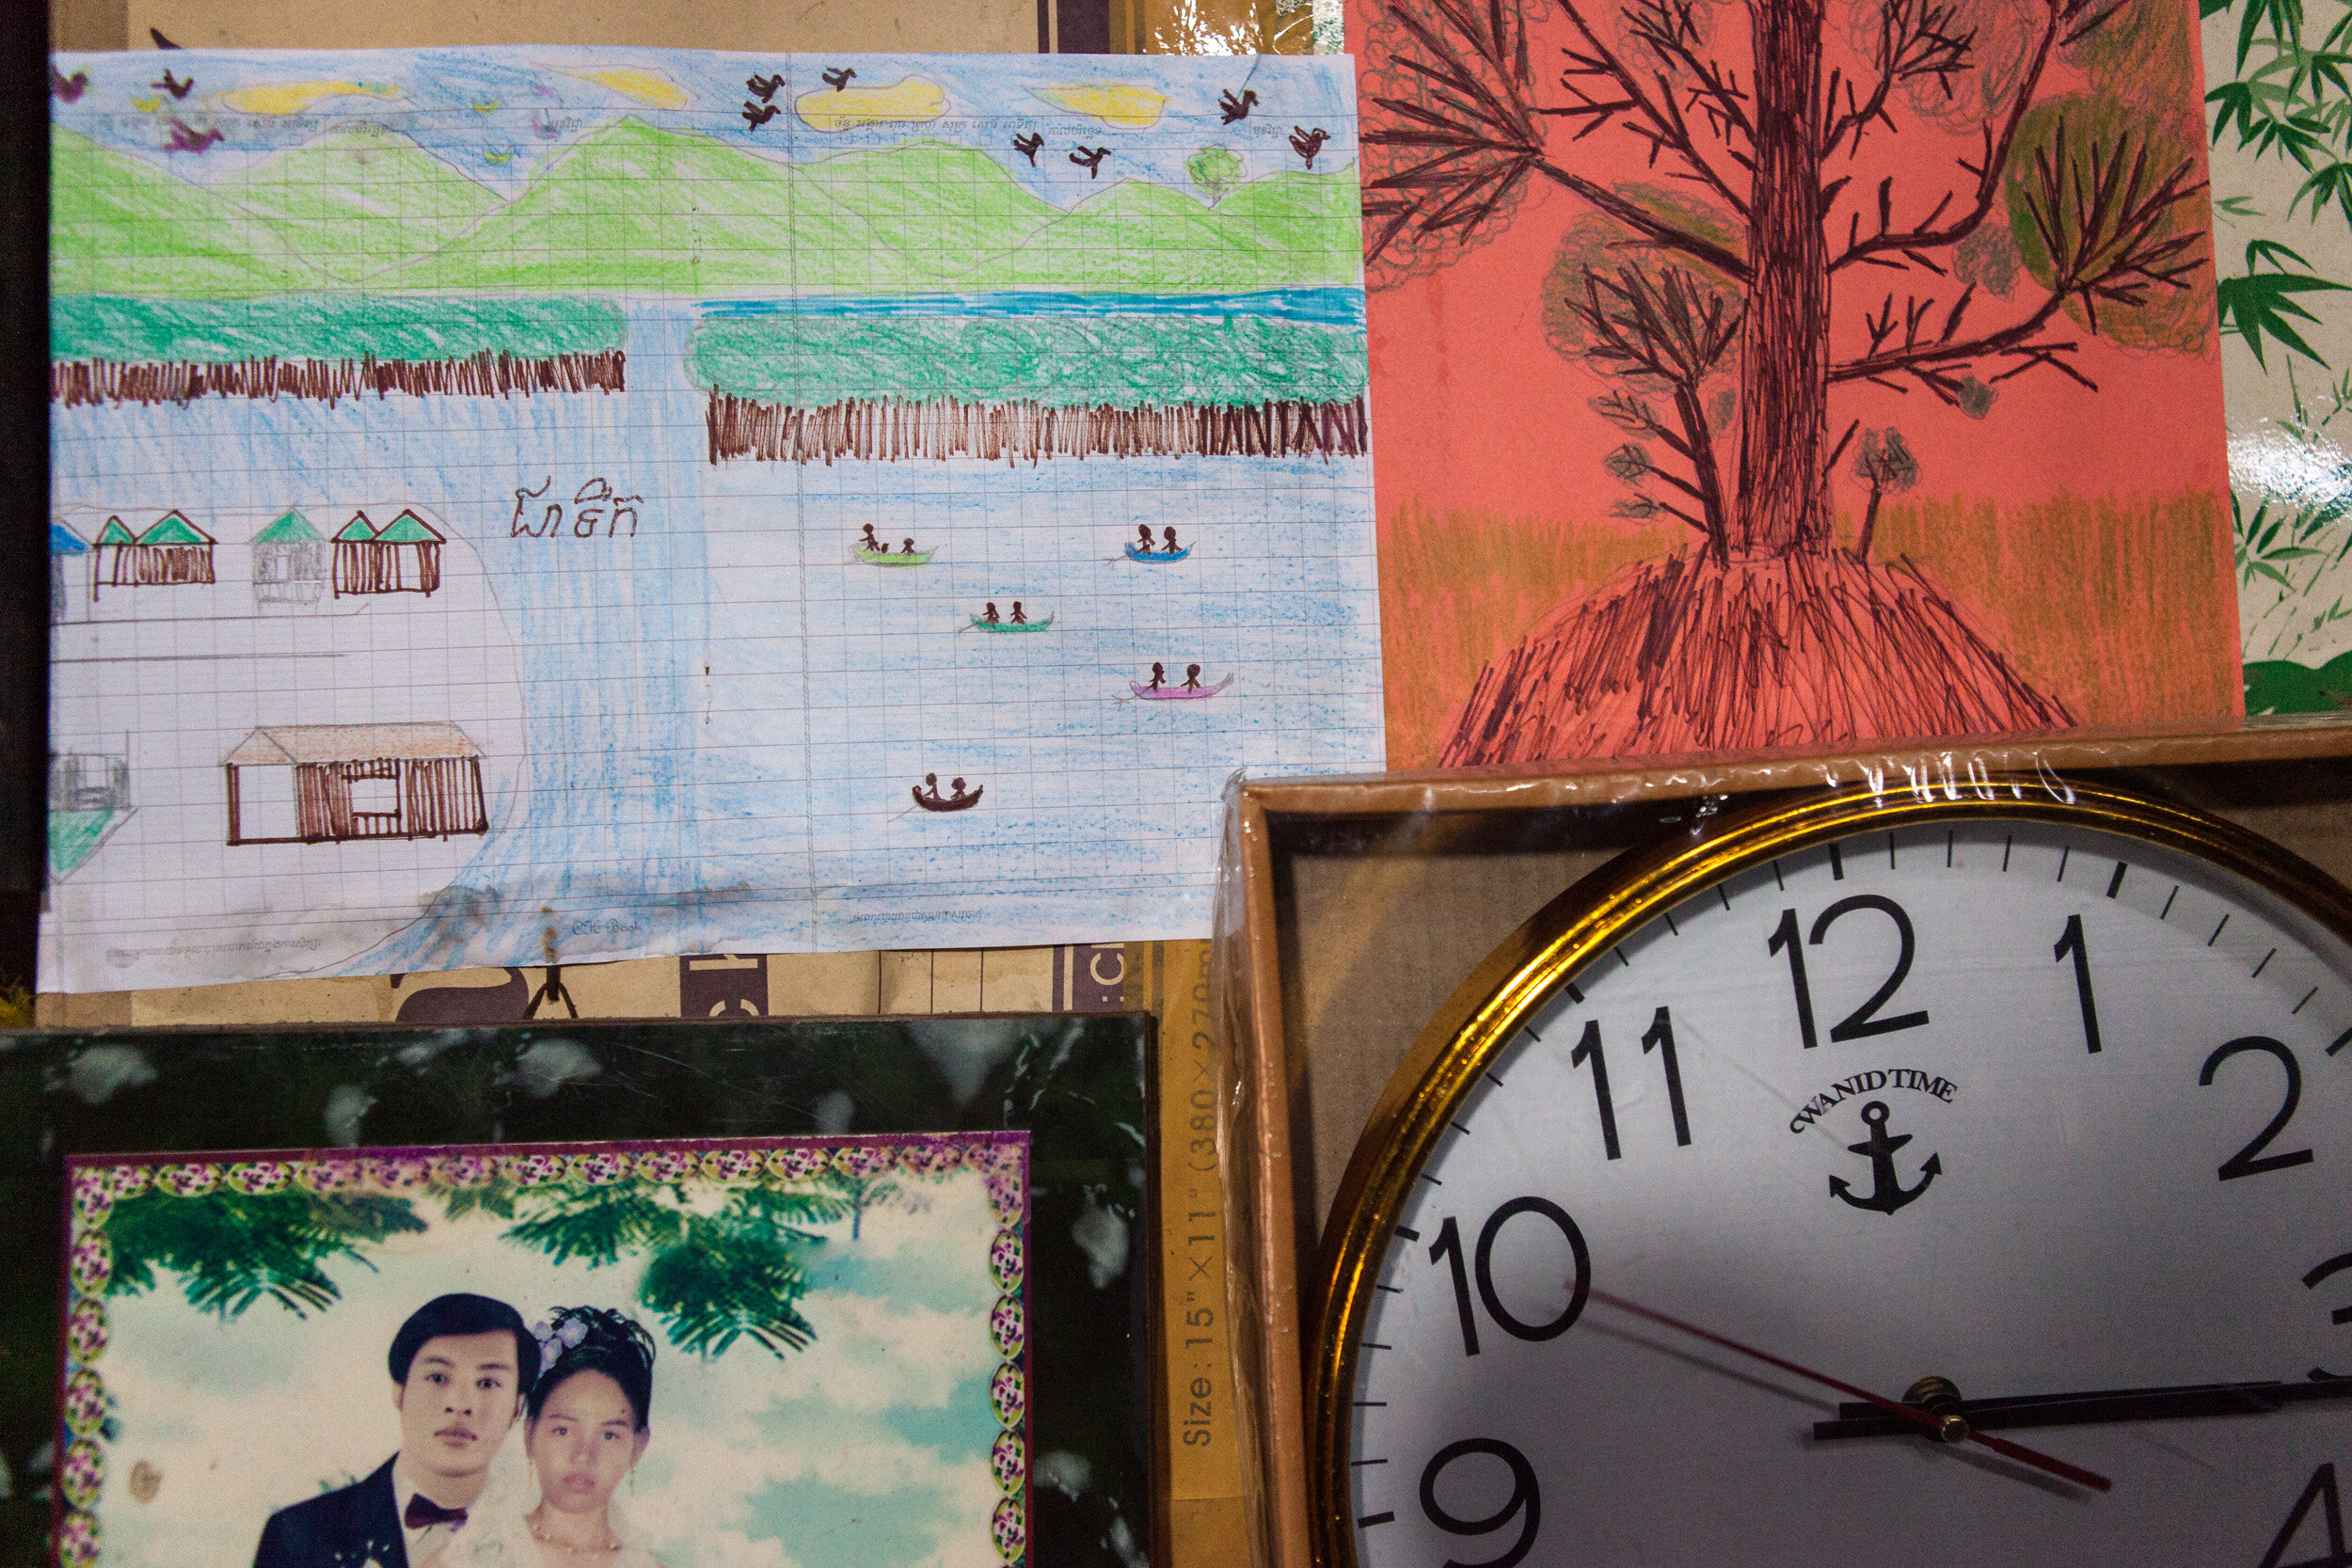  A child’s artwork inside a home in Koh Sralau depicts the island, mangrove forests, and locals fishing.  